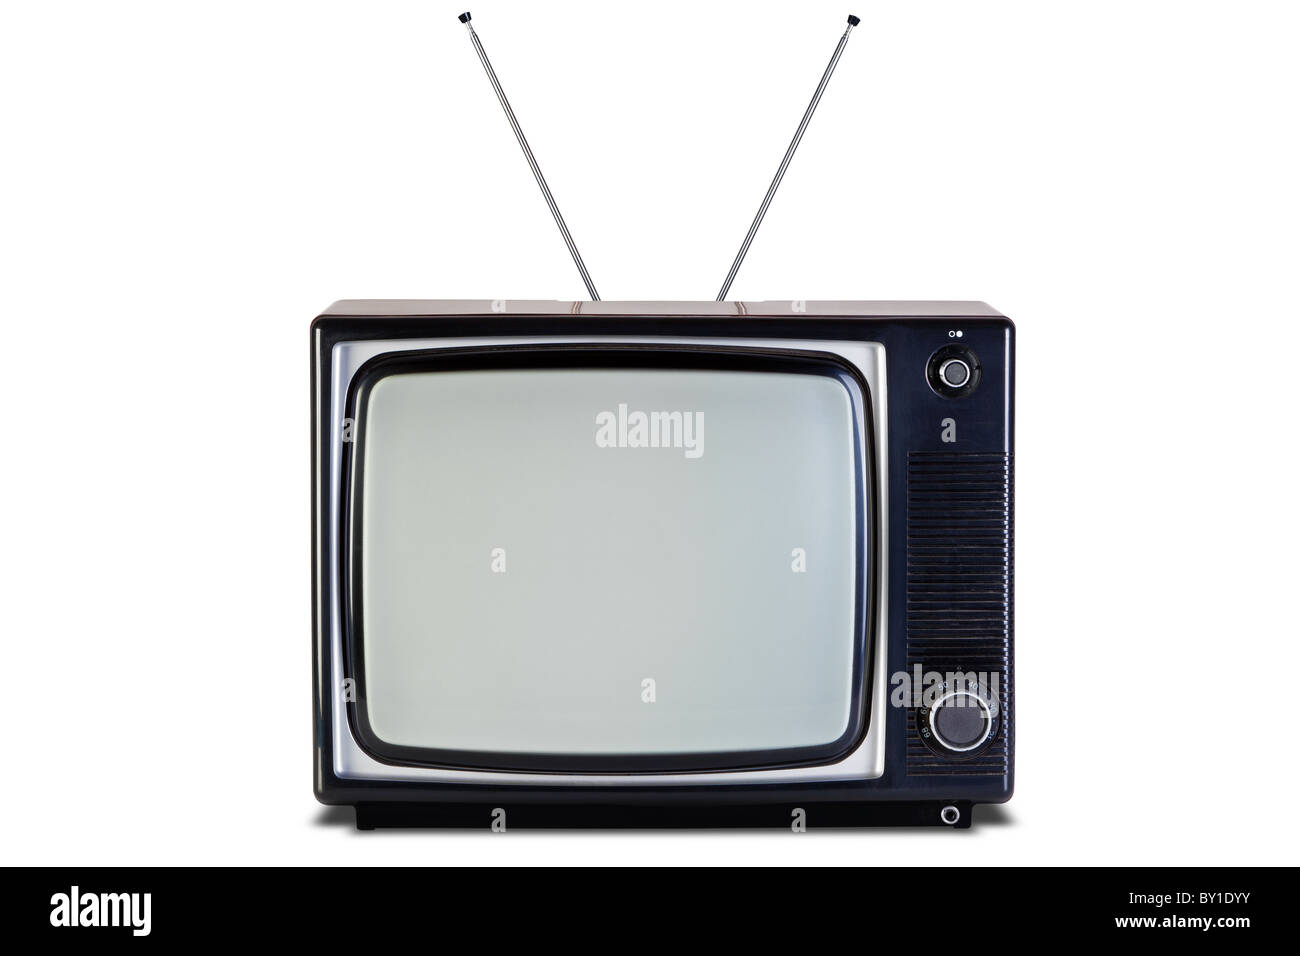 Old retro black and white tv set, isolated on a white background, with clipping paths for television and the screen. Stock Photo